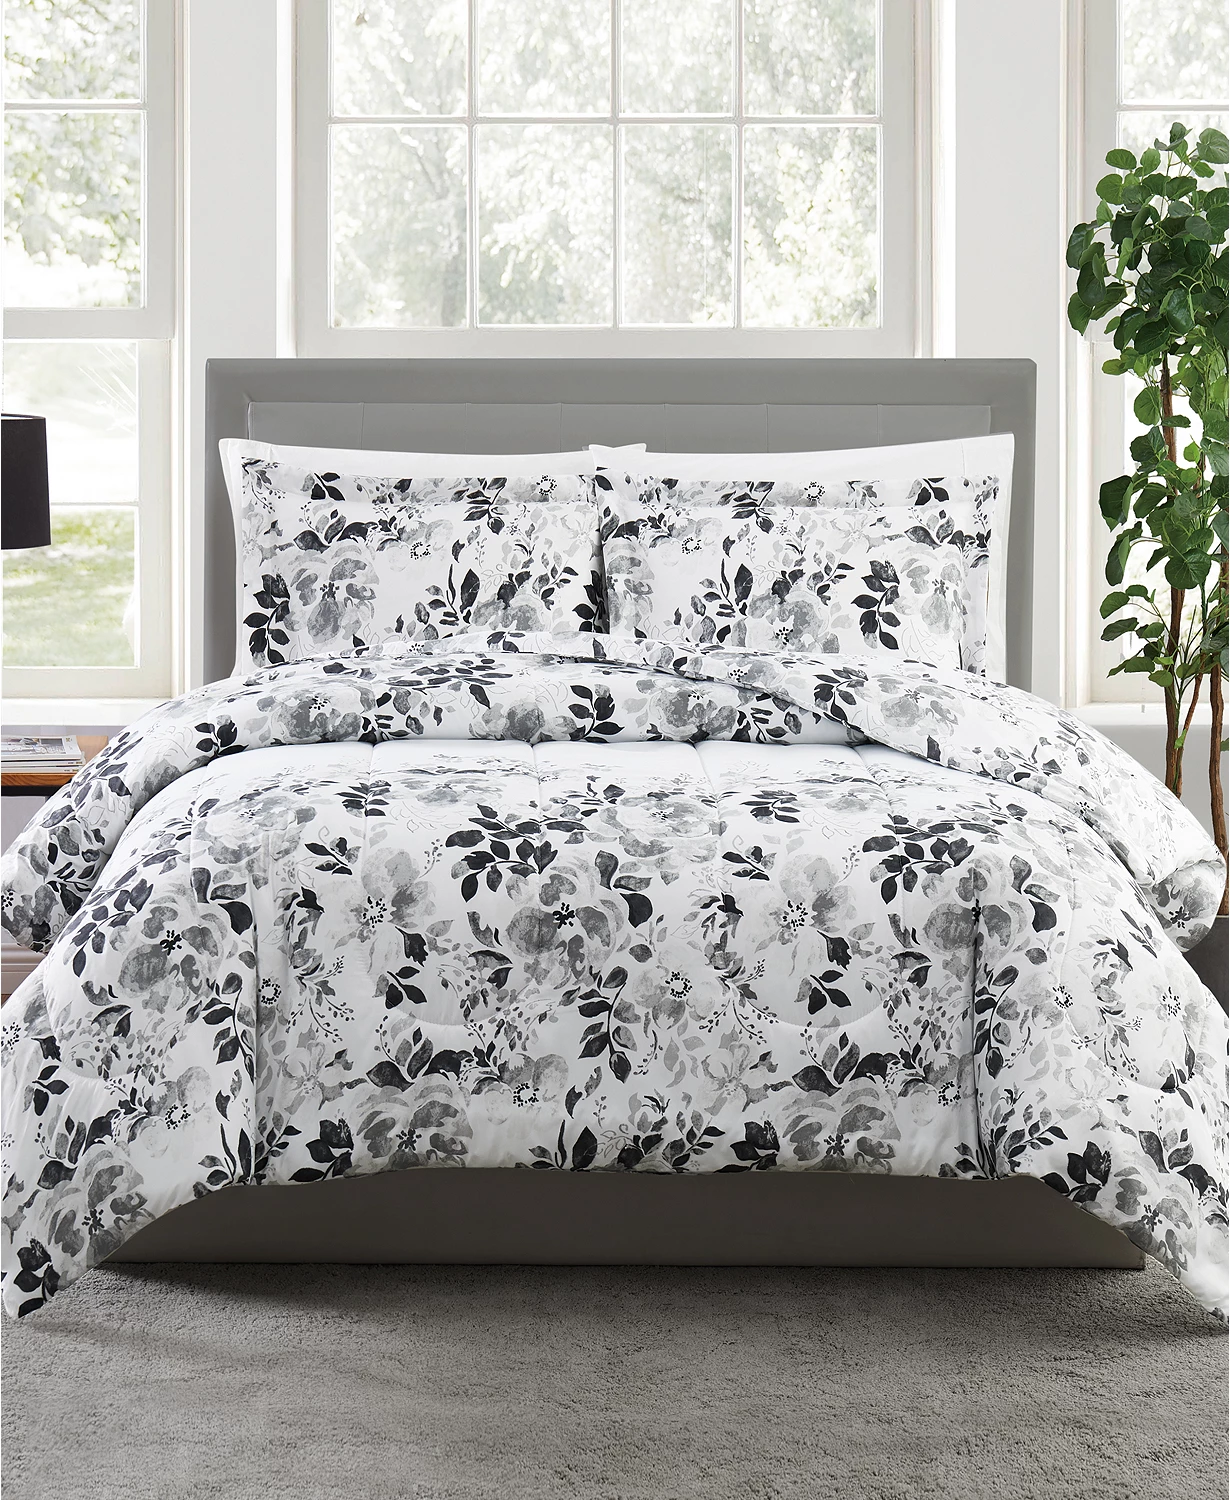 Black and White 3pc Comforter Set CLOSEOUT DEAL! RUN!